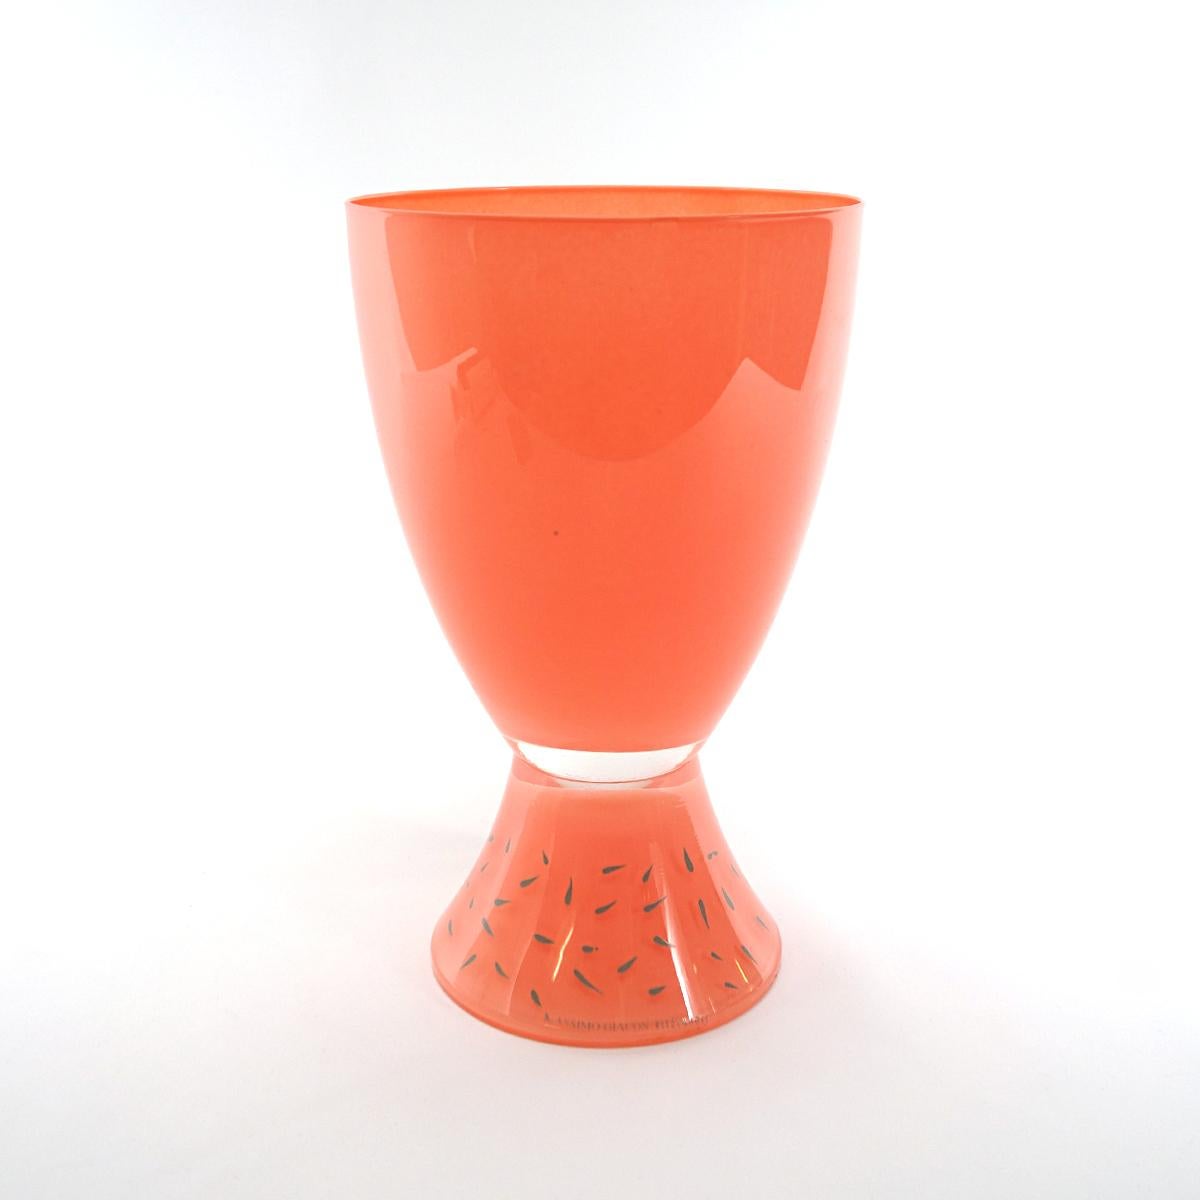 Post-Modern Glass Vase by Massimo Giacon for Vis-à-vis Collection of Ritzenhoff In Good Condition For Sale In Doornspijk, NL